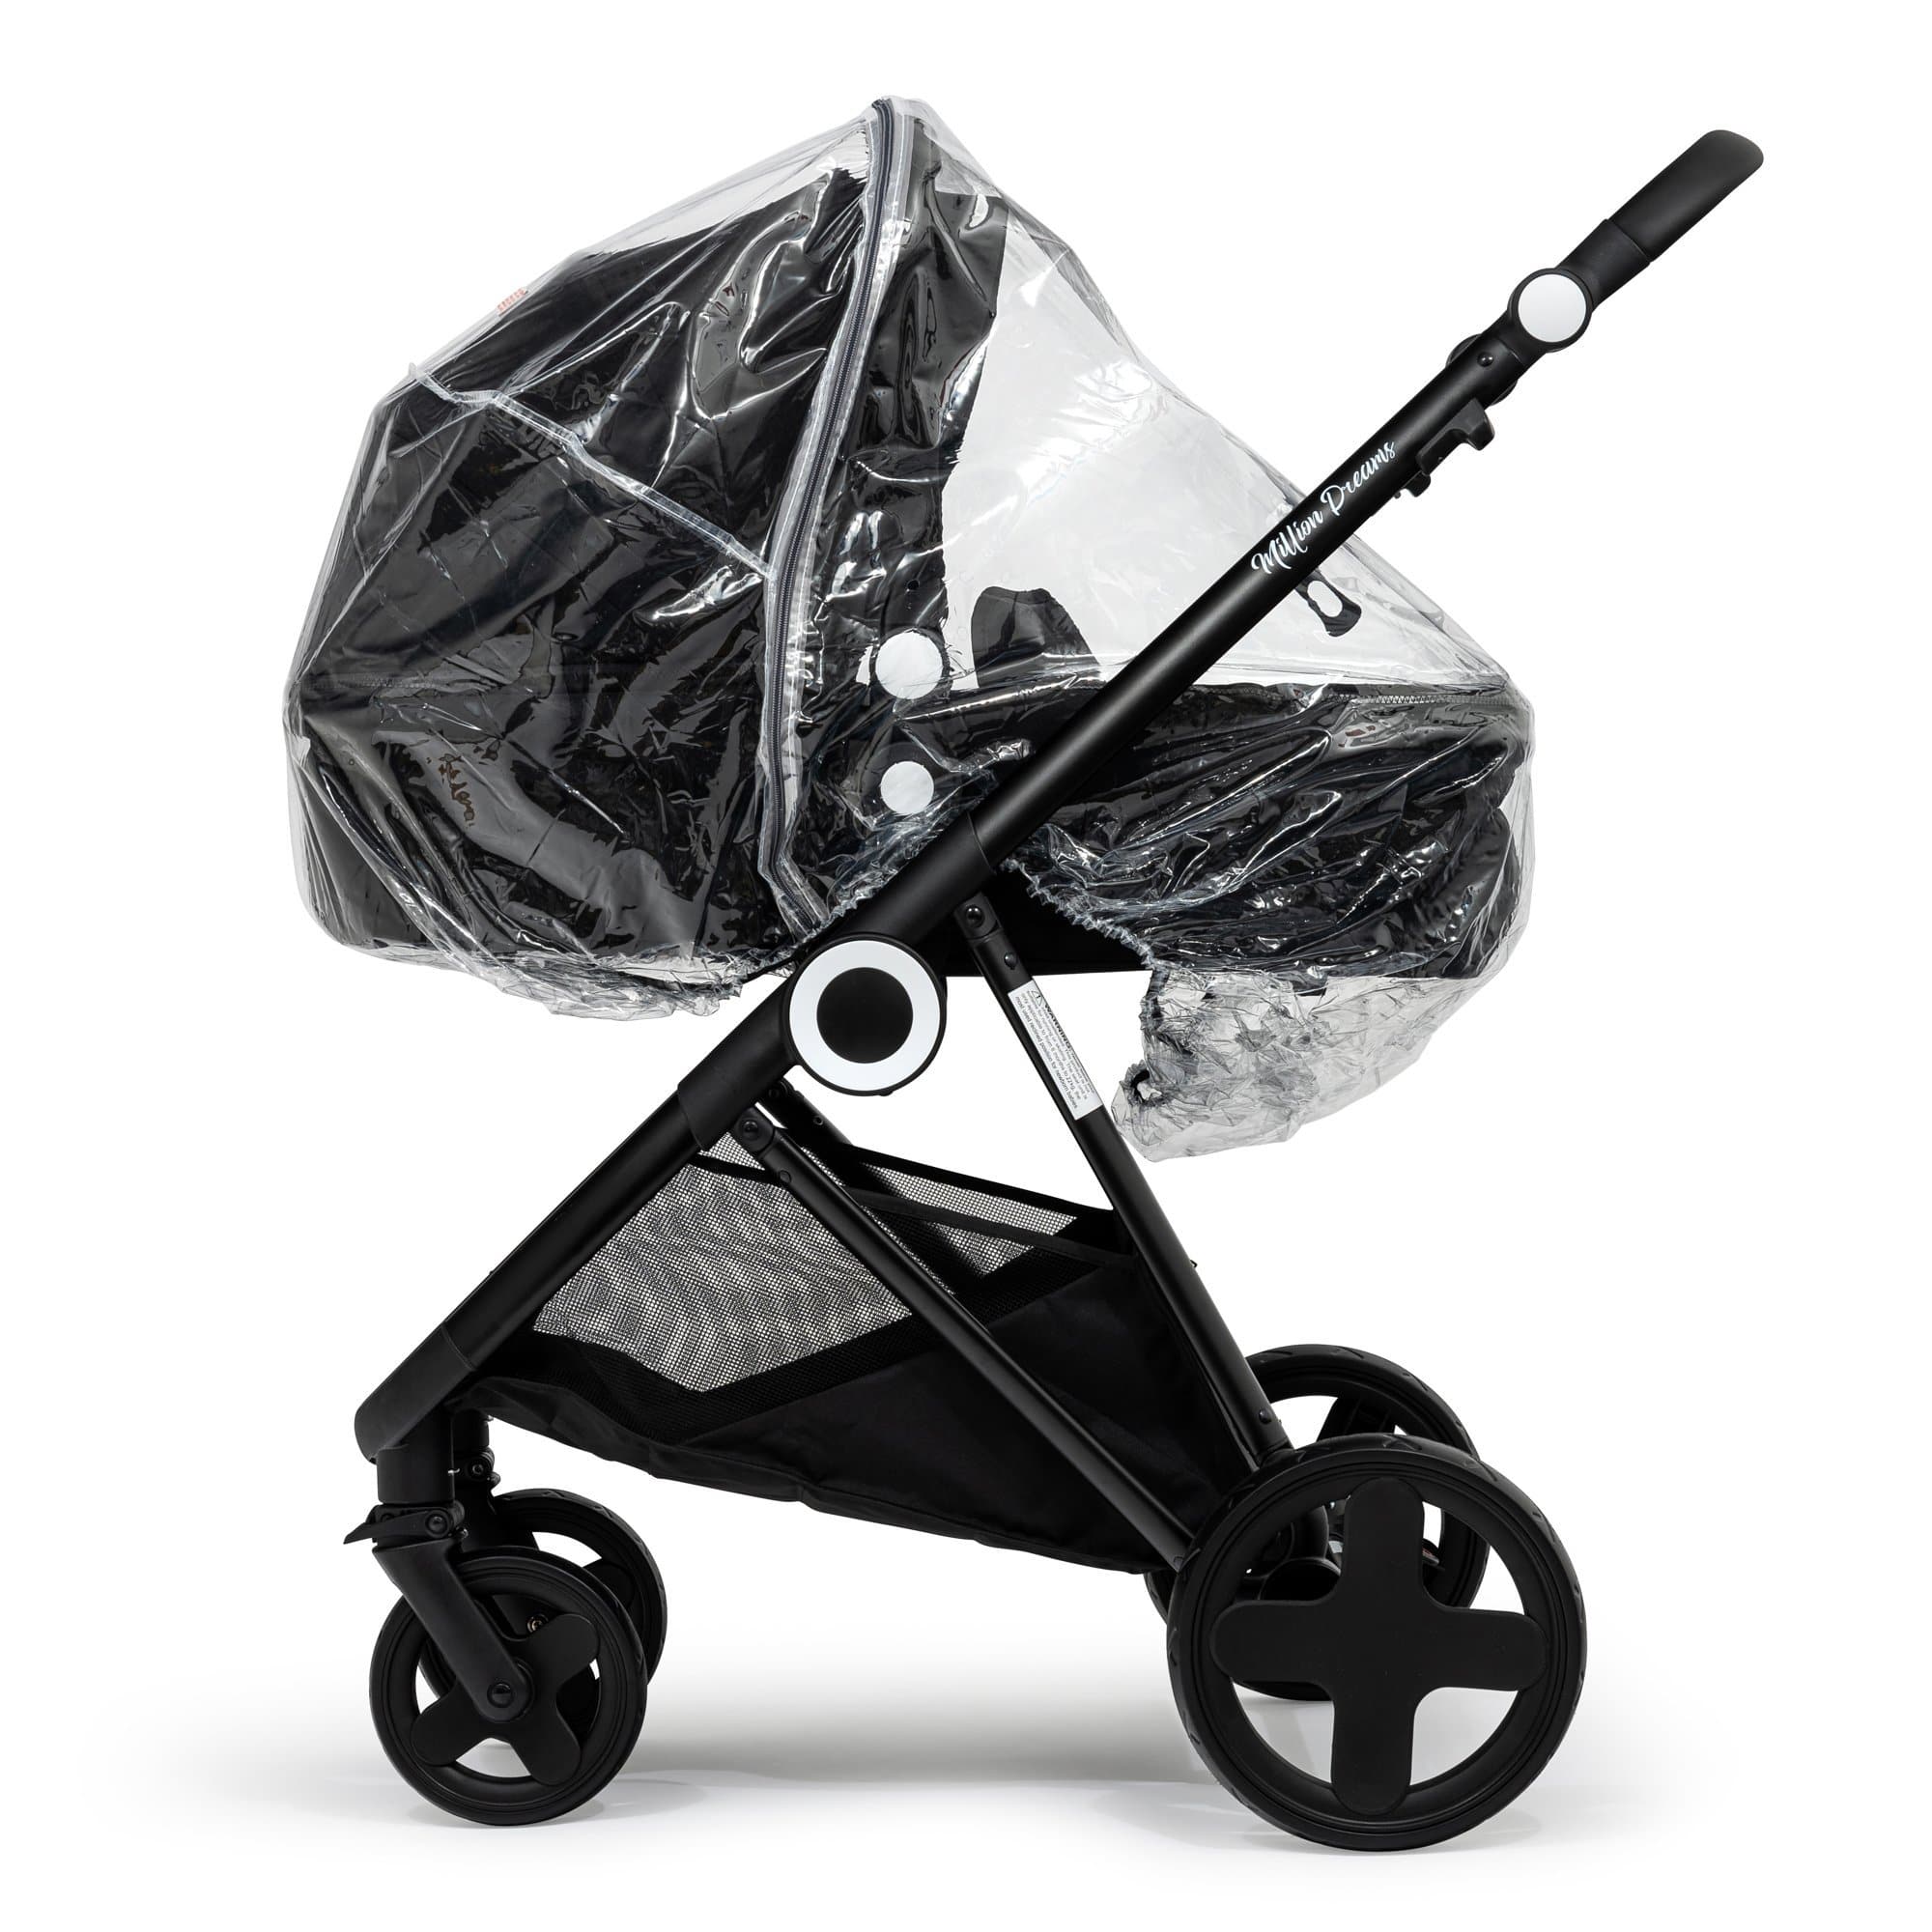 2 in 1 Rain Cover Compatible with BabiesRus - Fits All Models - For Your Little One